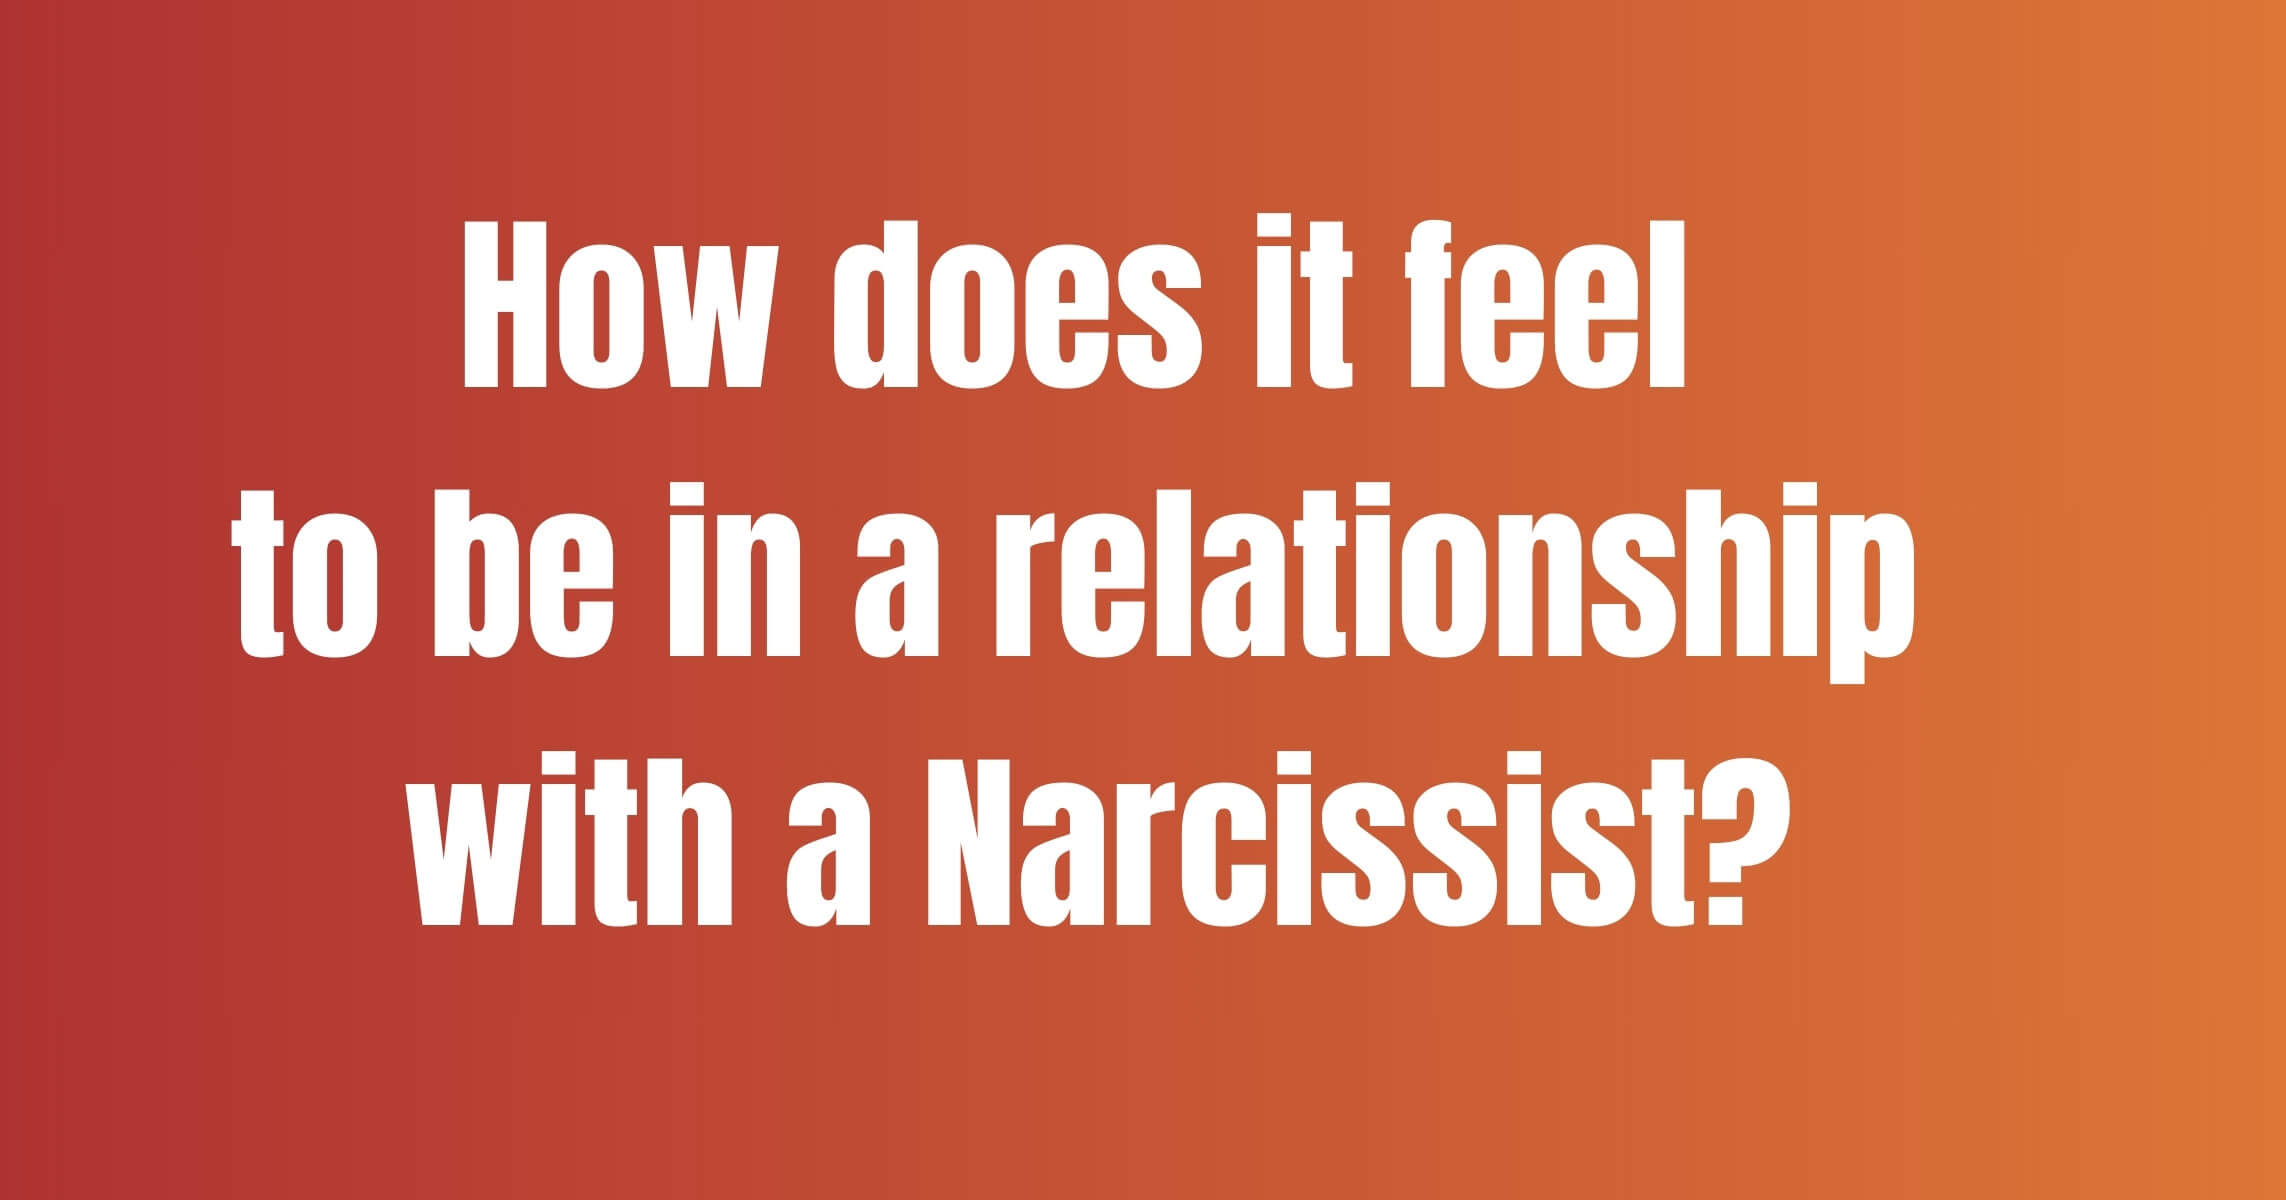 How does it feel to be in a relationship with a Narcissist